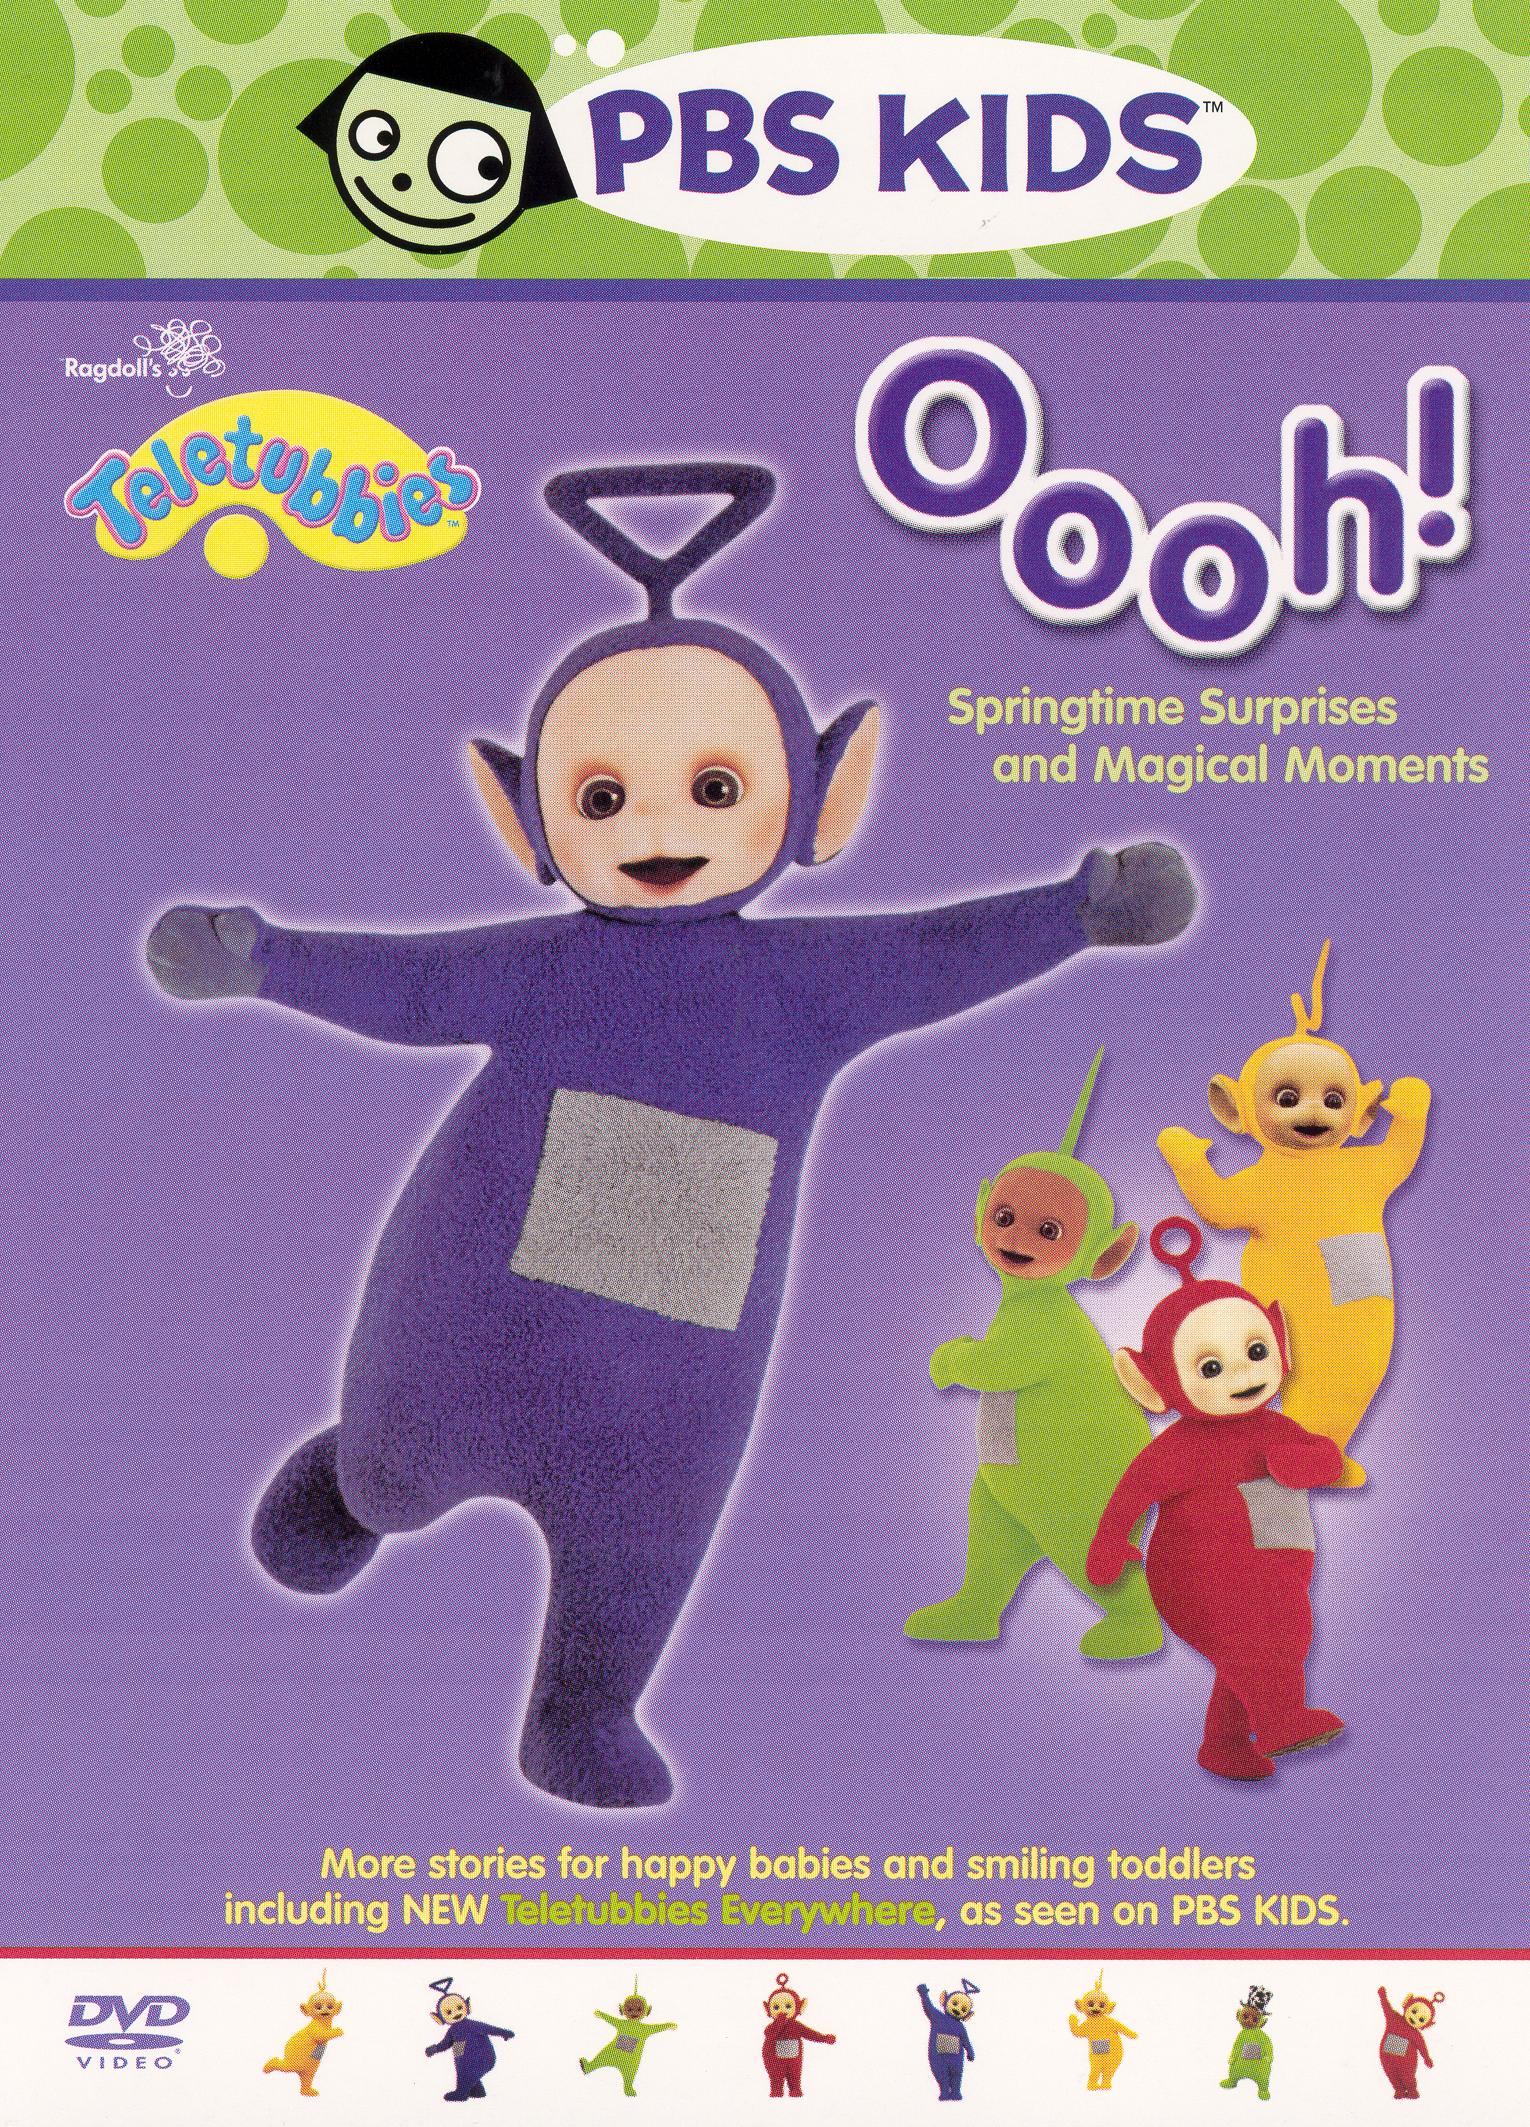 Teletubbies: Oooh! - Springtime Surprises and Magical Moments (2003